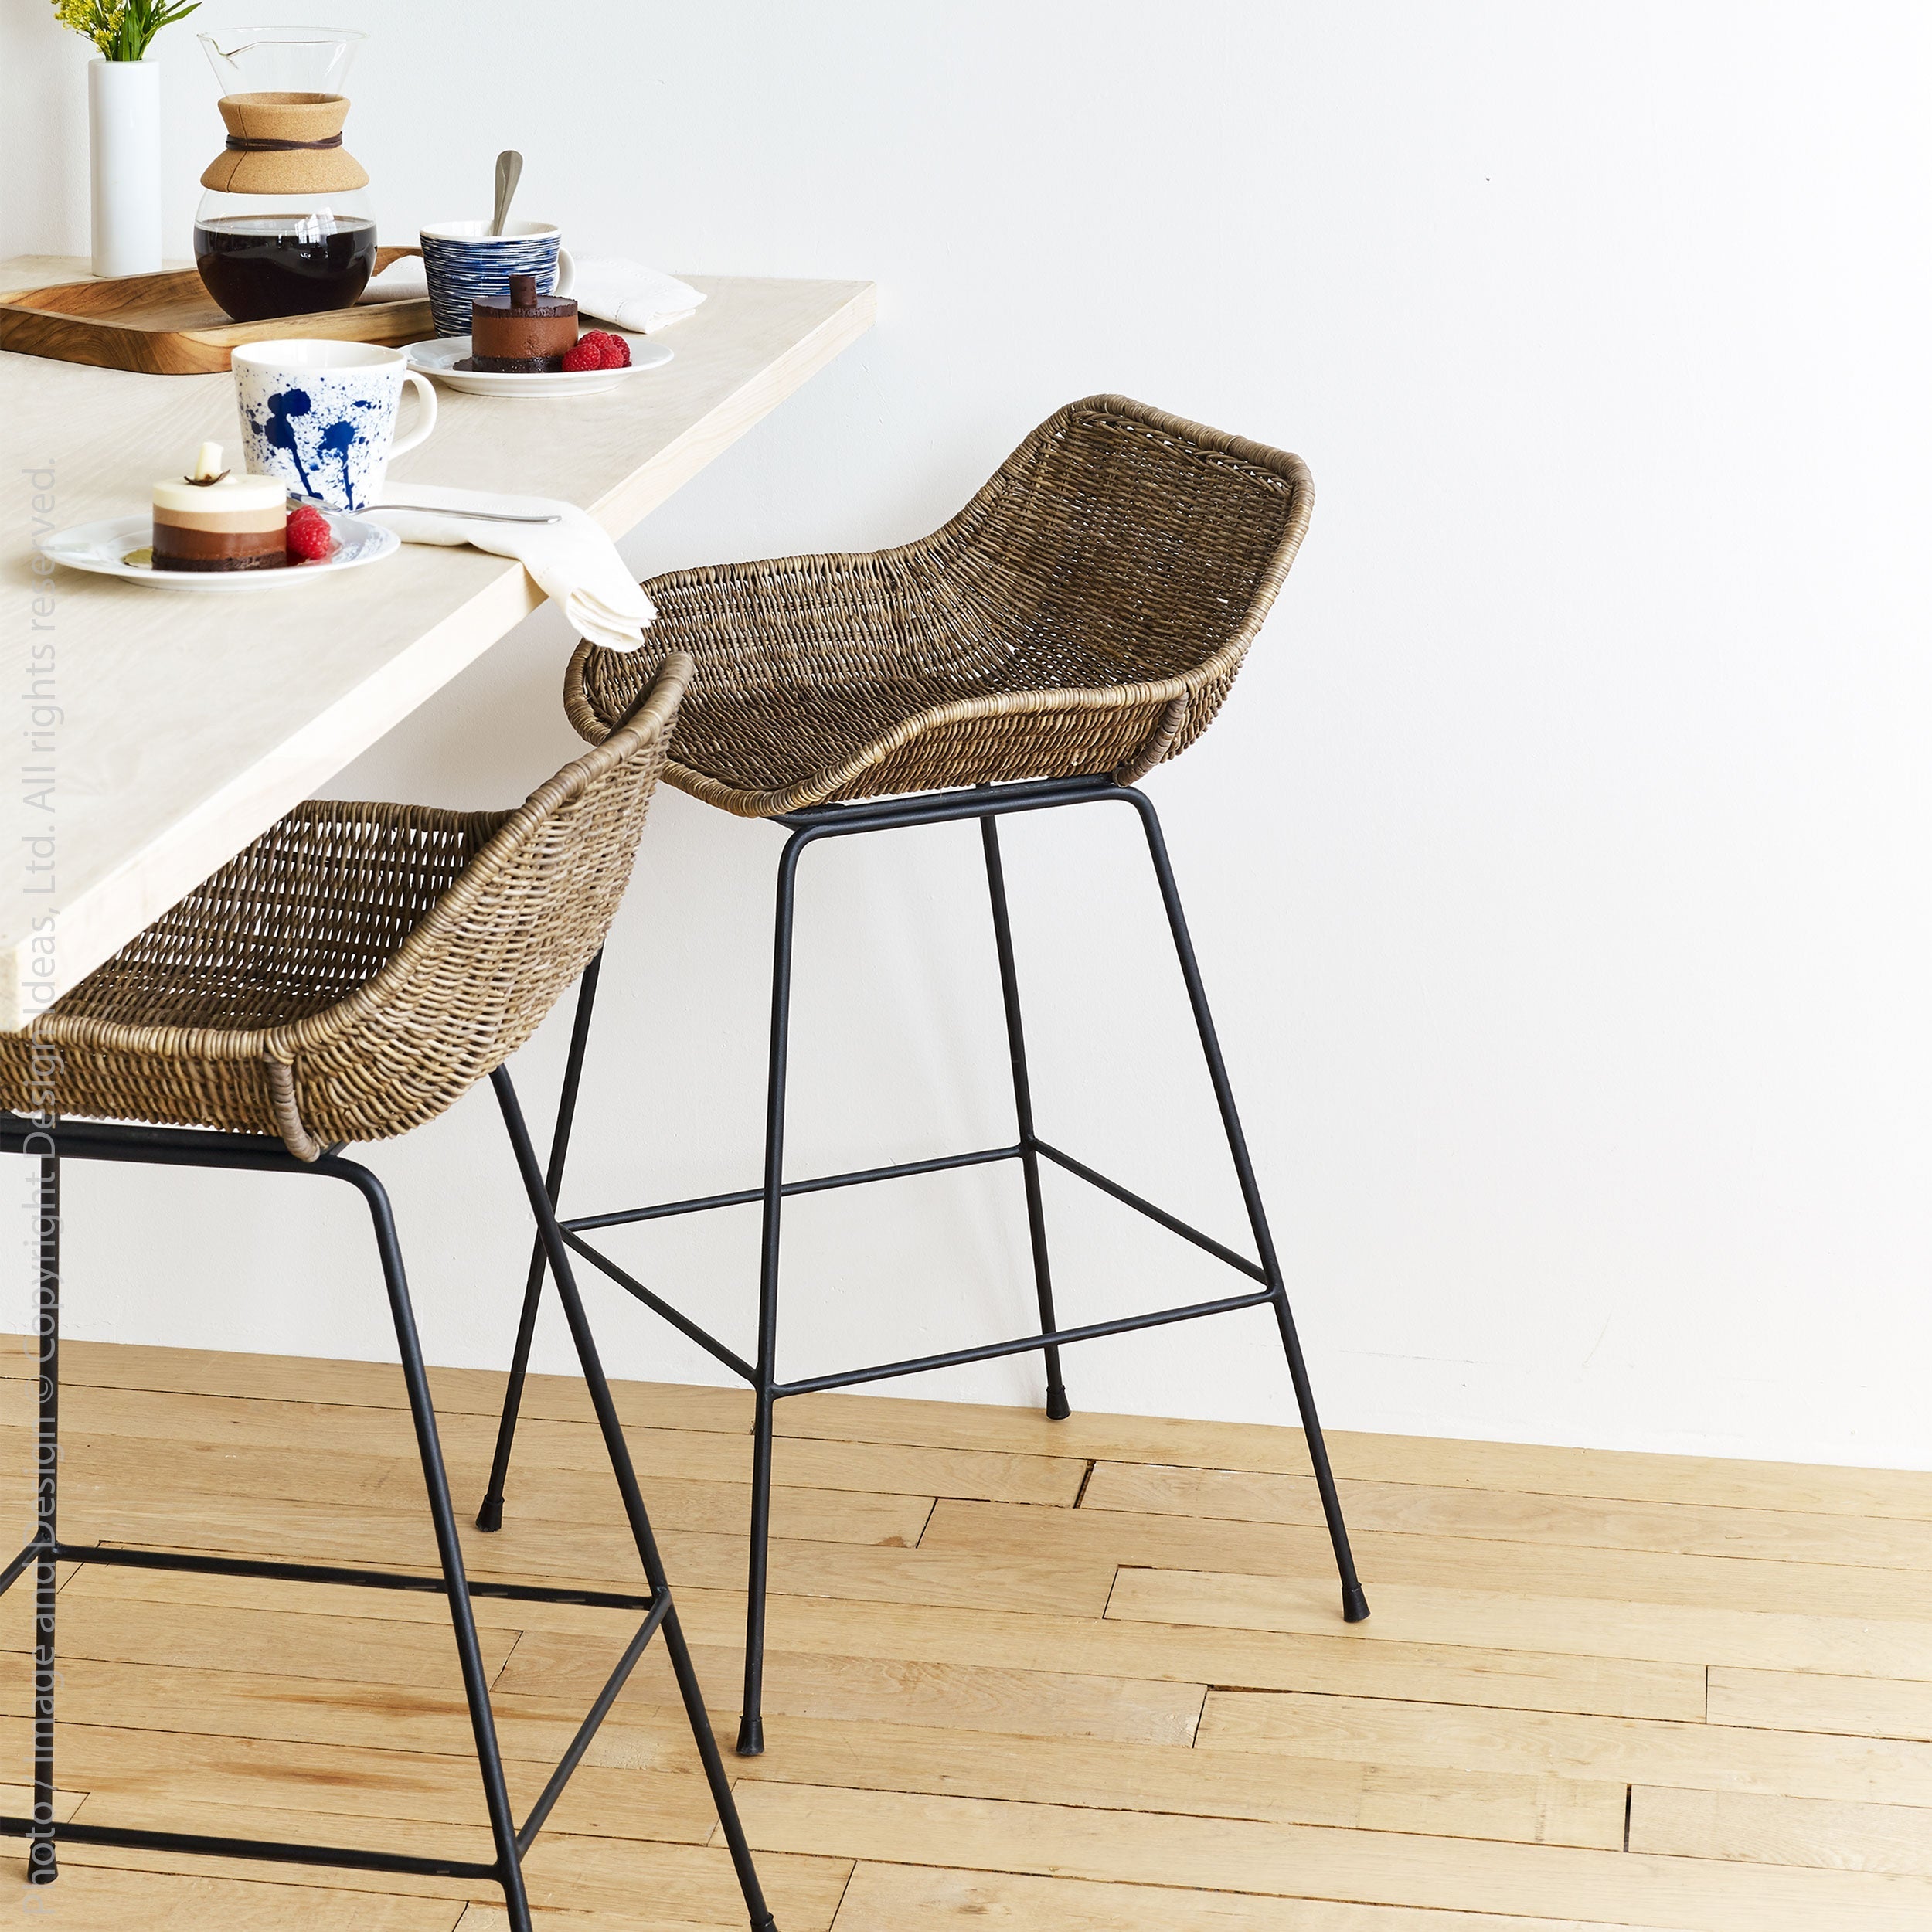 Ormond Rattan Bar Stool Black Color | Image 2 | From the Ormond Collection | Elegantly made with natural rattan for long lasting use | Available in natural color | texxture home